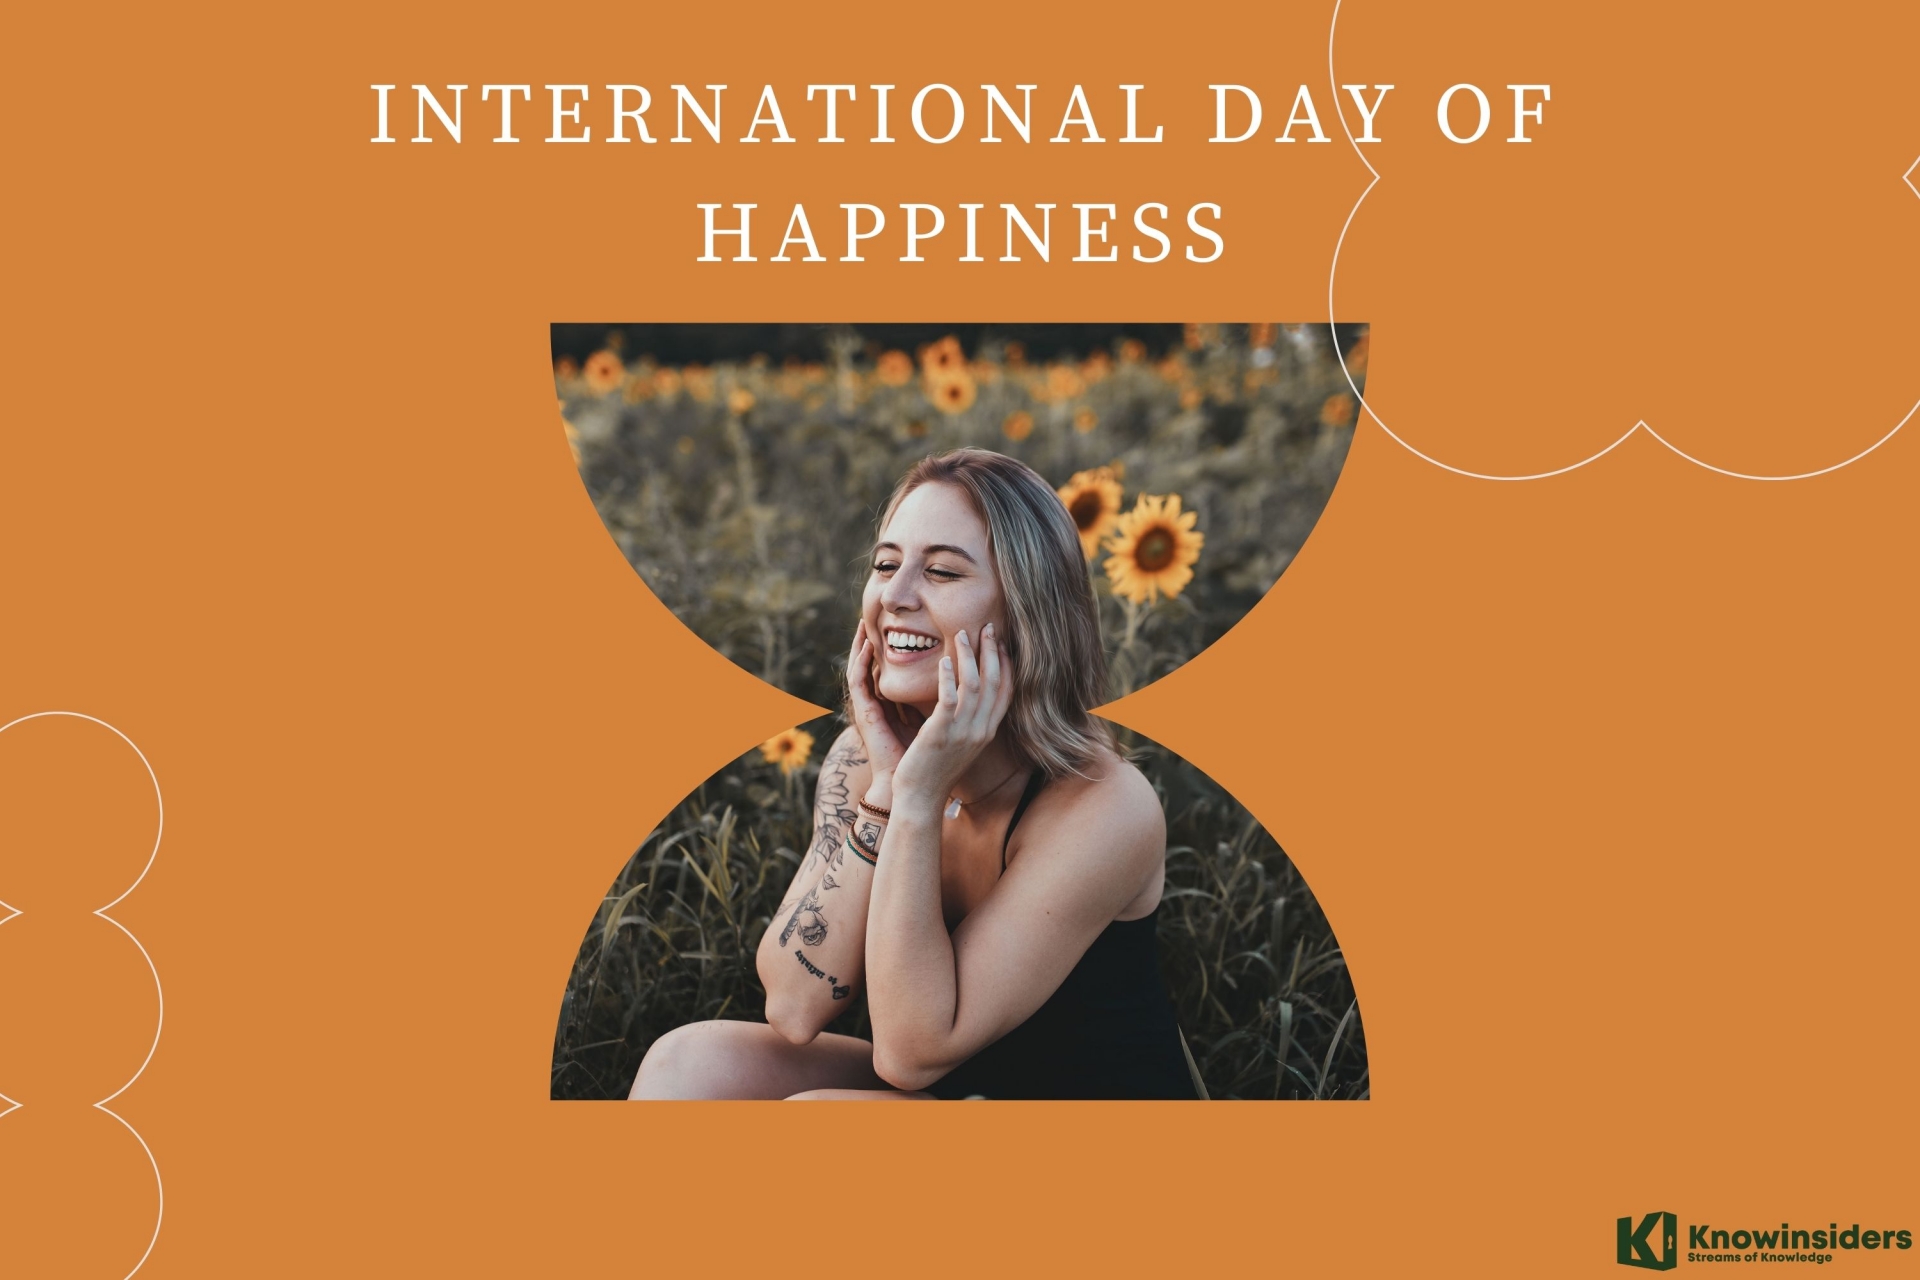 International Day Of Happiness: Date, Best Wishes & Quotes, Celebration and Happiest Countries